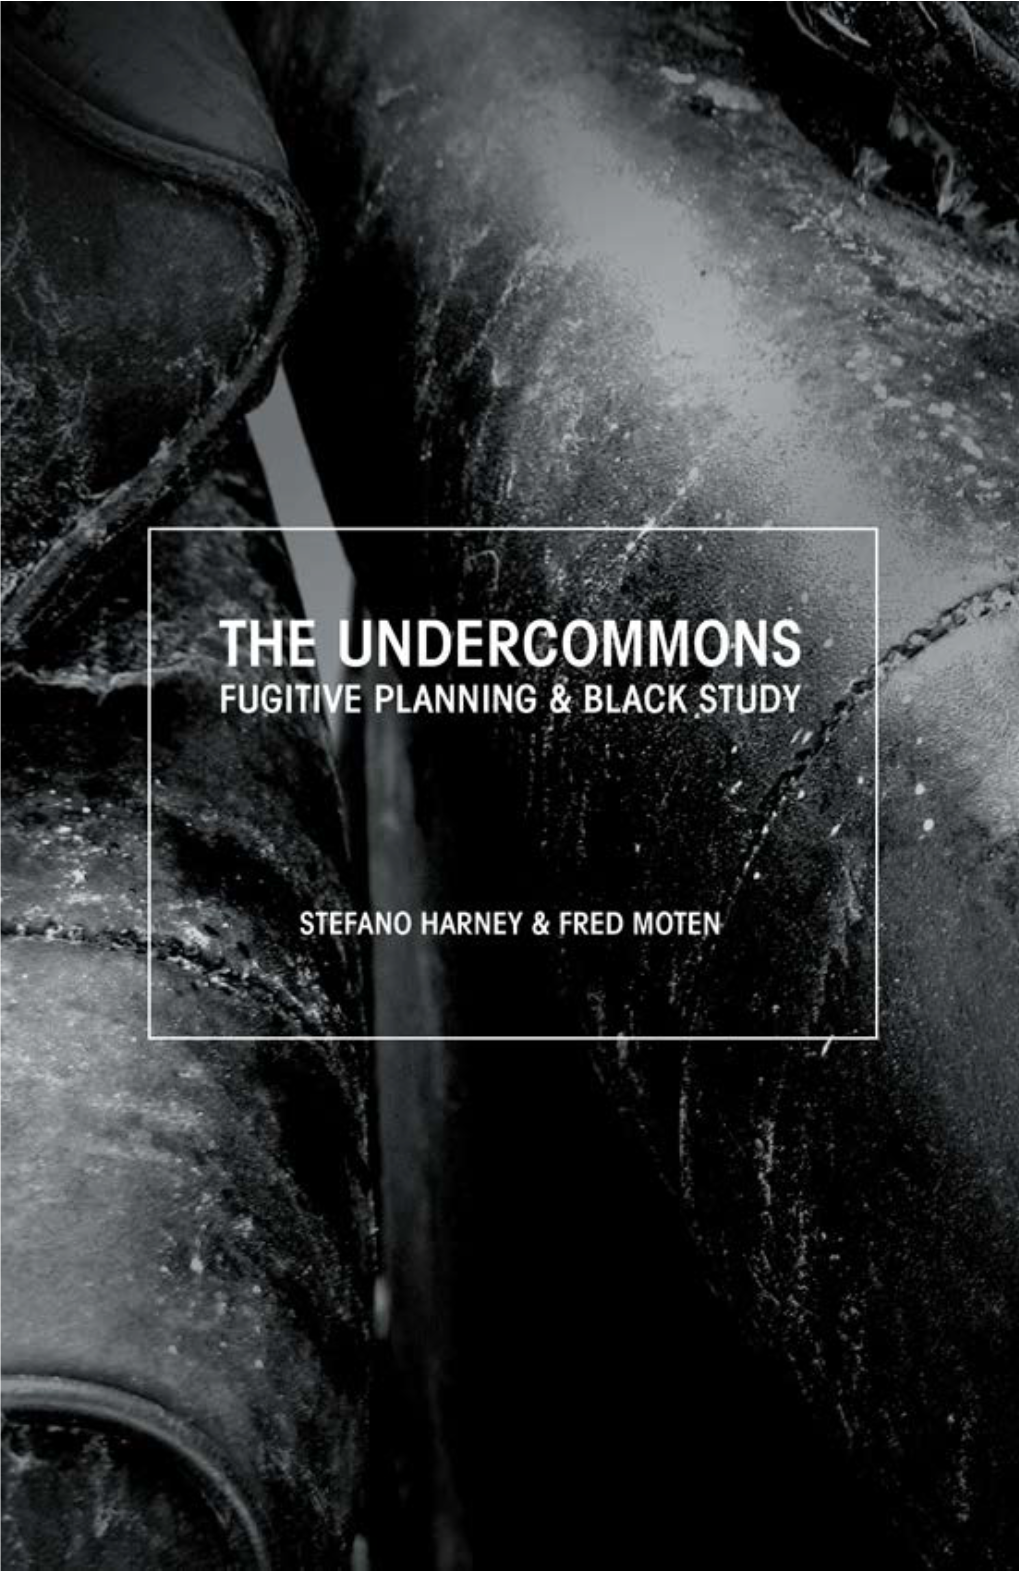 The Undercommons: Fugitive Planning & Black Study Stefano Harney and Fred Moten